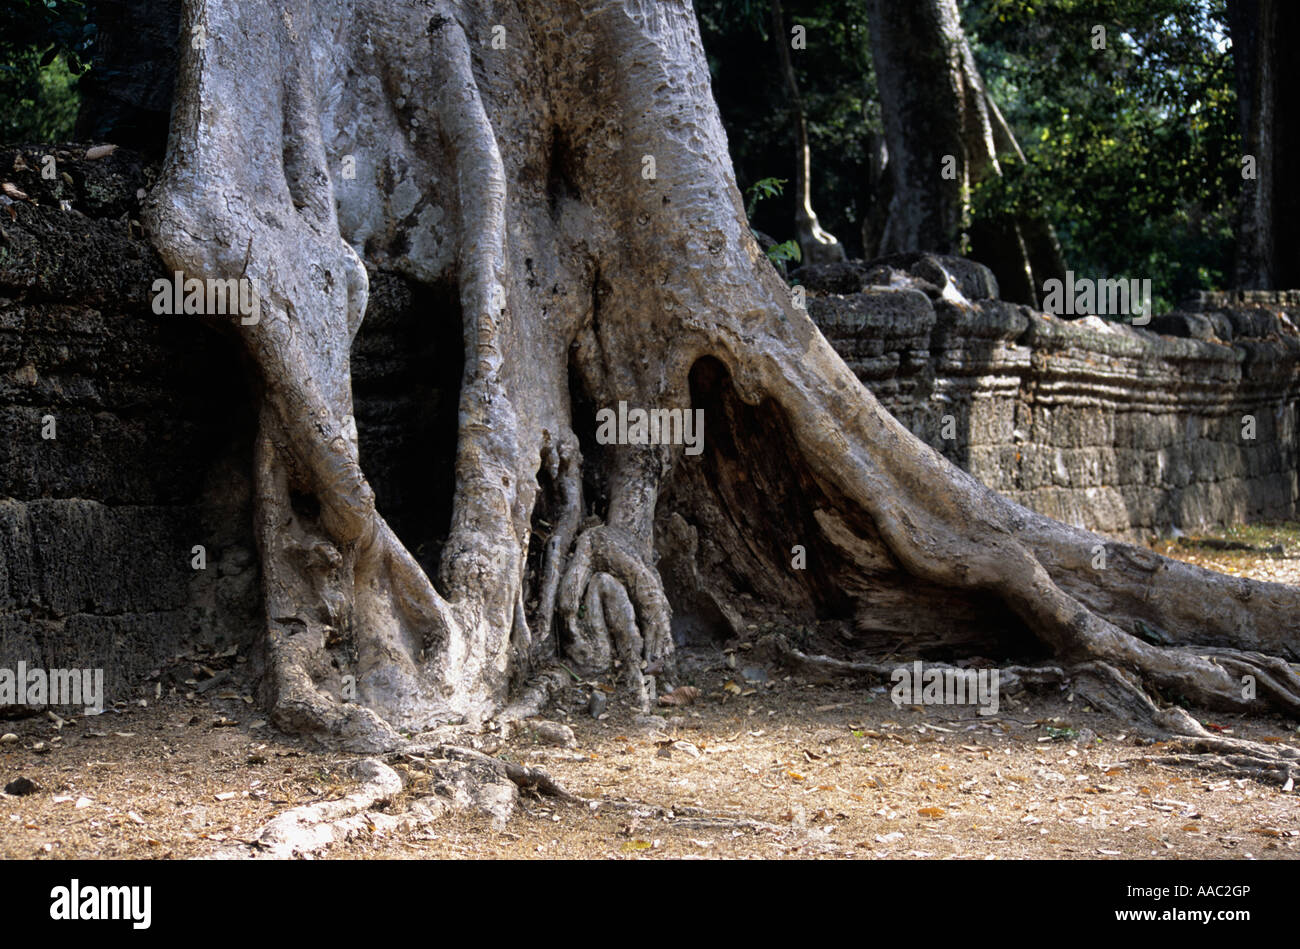 Tree overgrowing temple at Angkor Wat complex,Cambodia Stock Photo